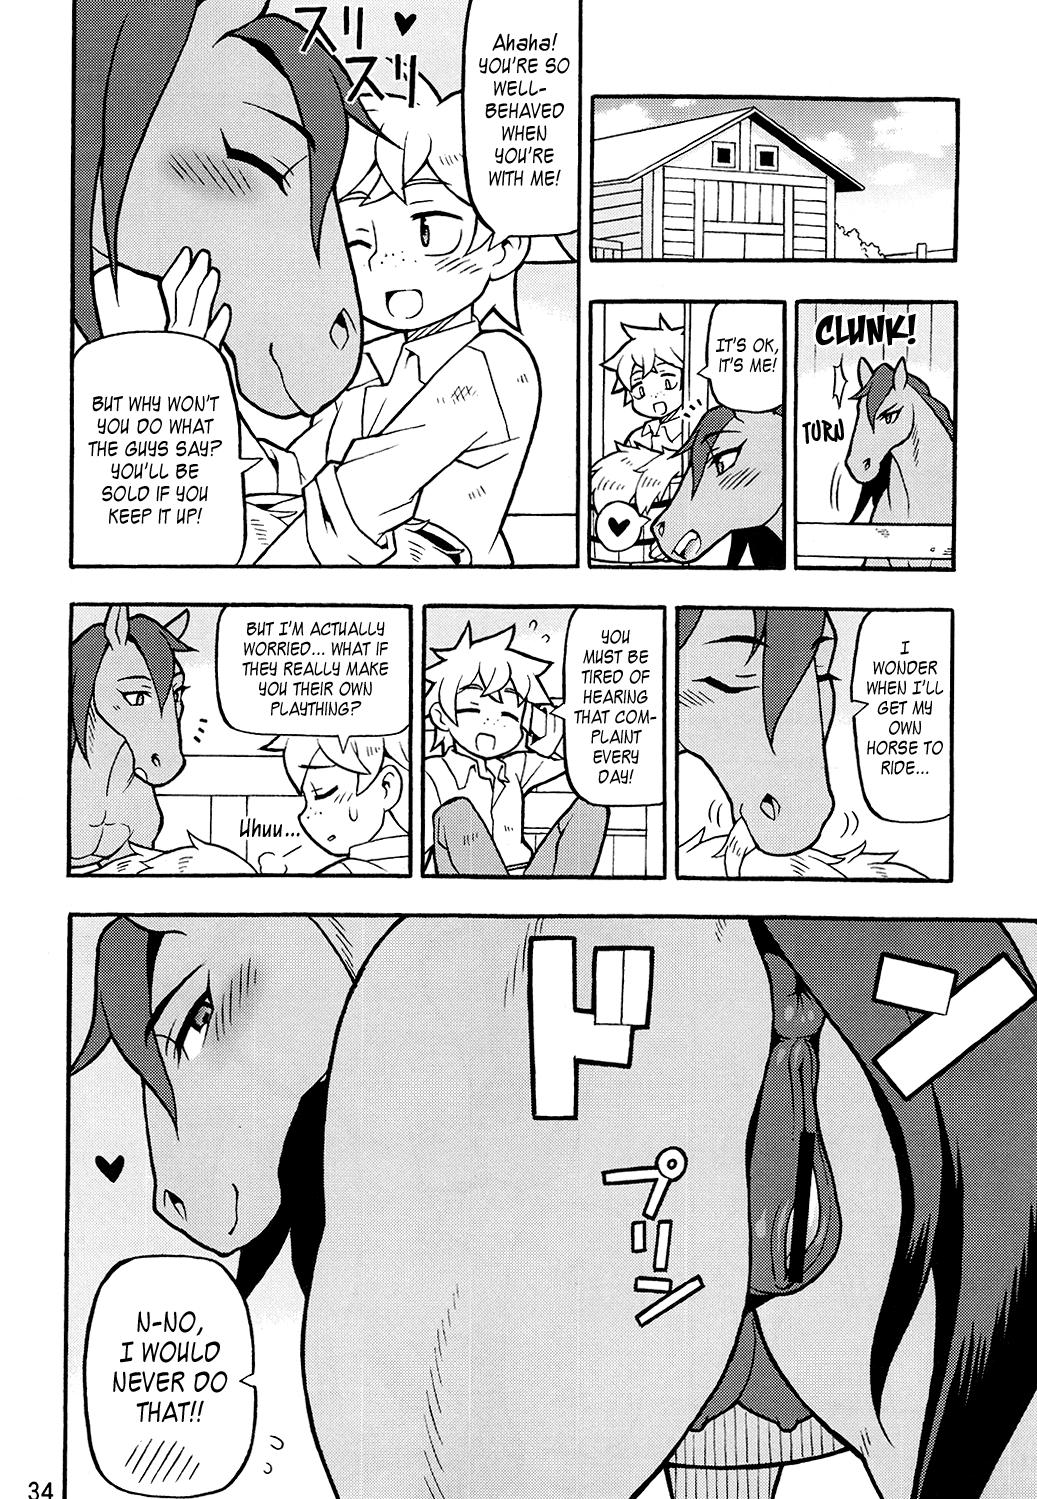 Piercings Mare Holic 4 Kemolover EX Ch. 4, 8, 10-11, 19 Wives - Page 4